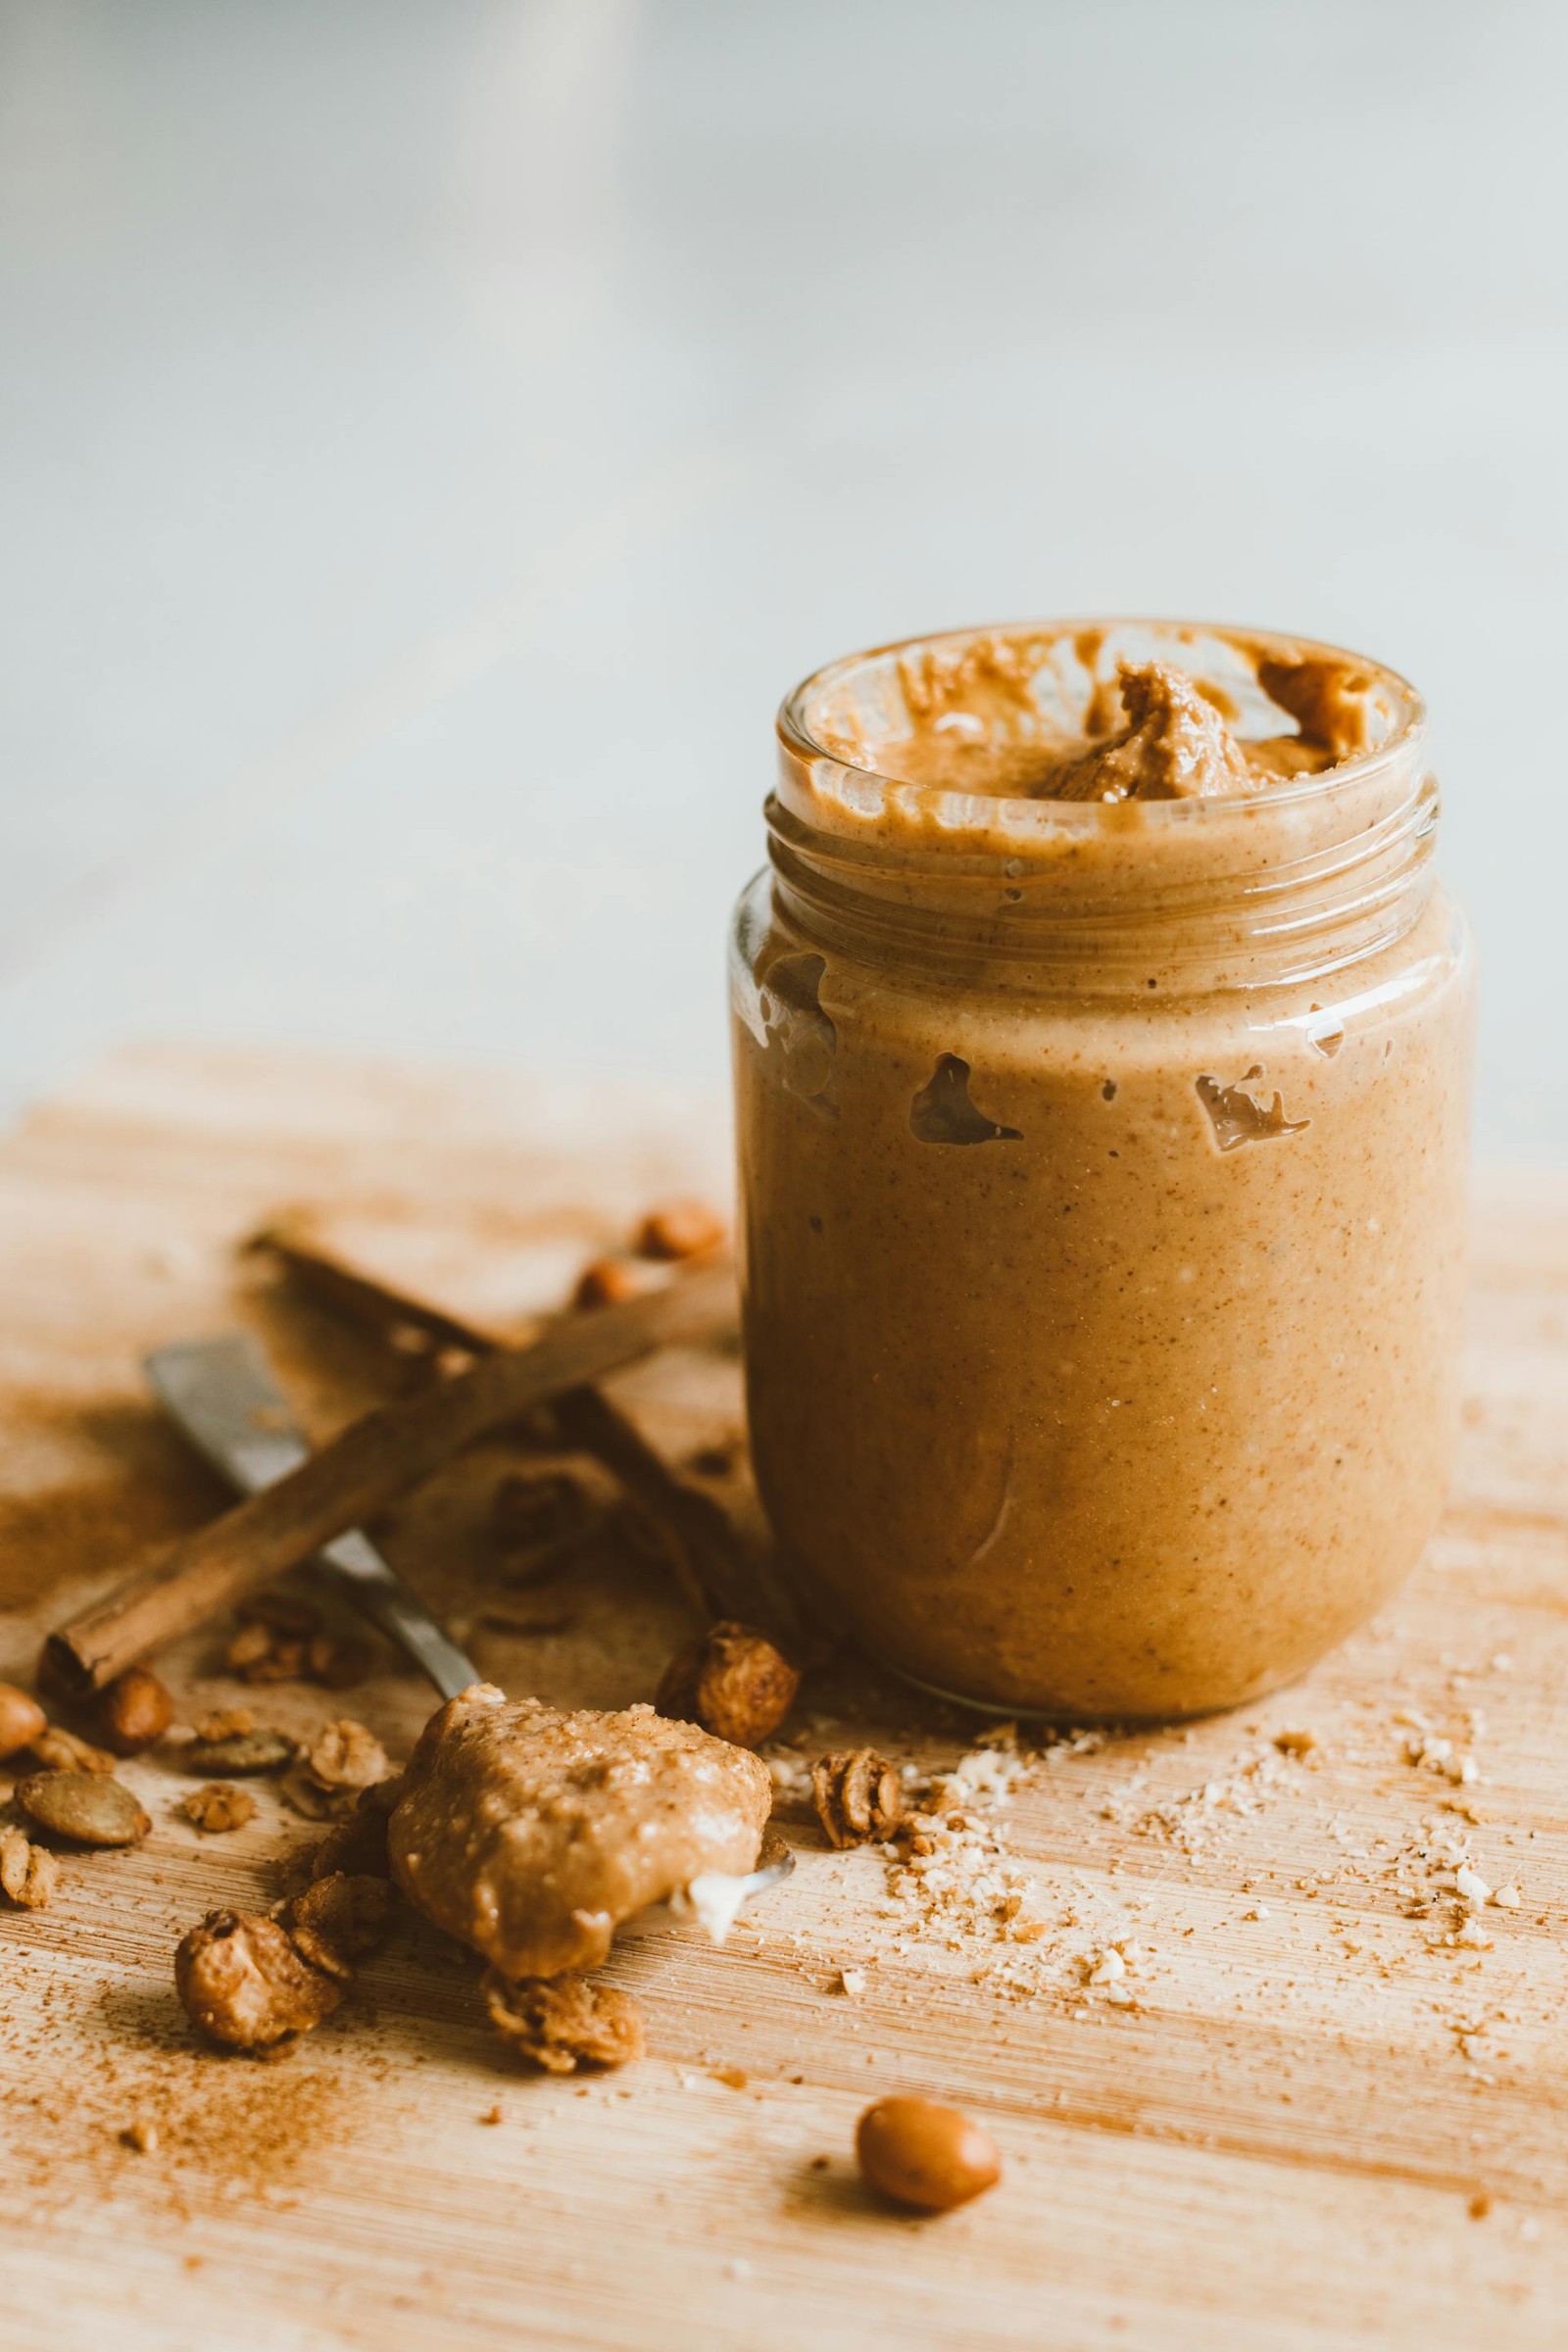 Learn How to Make Any Nut Butter So You Can Save Money!